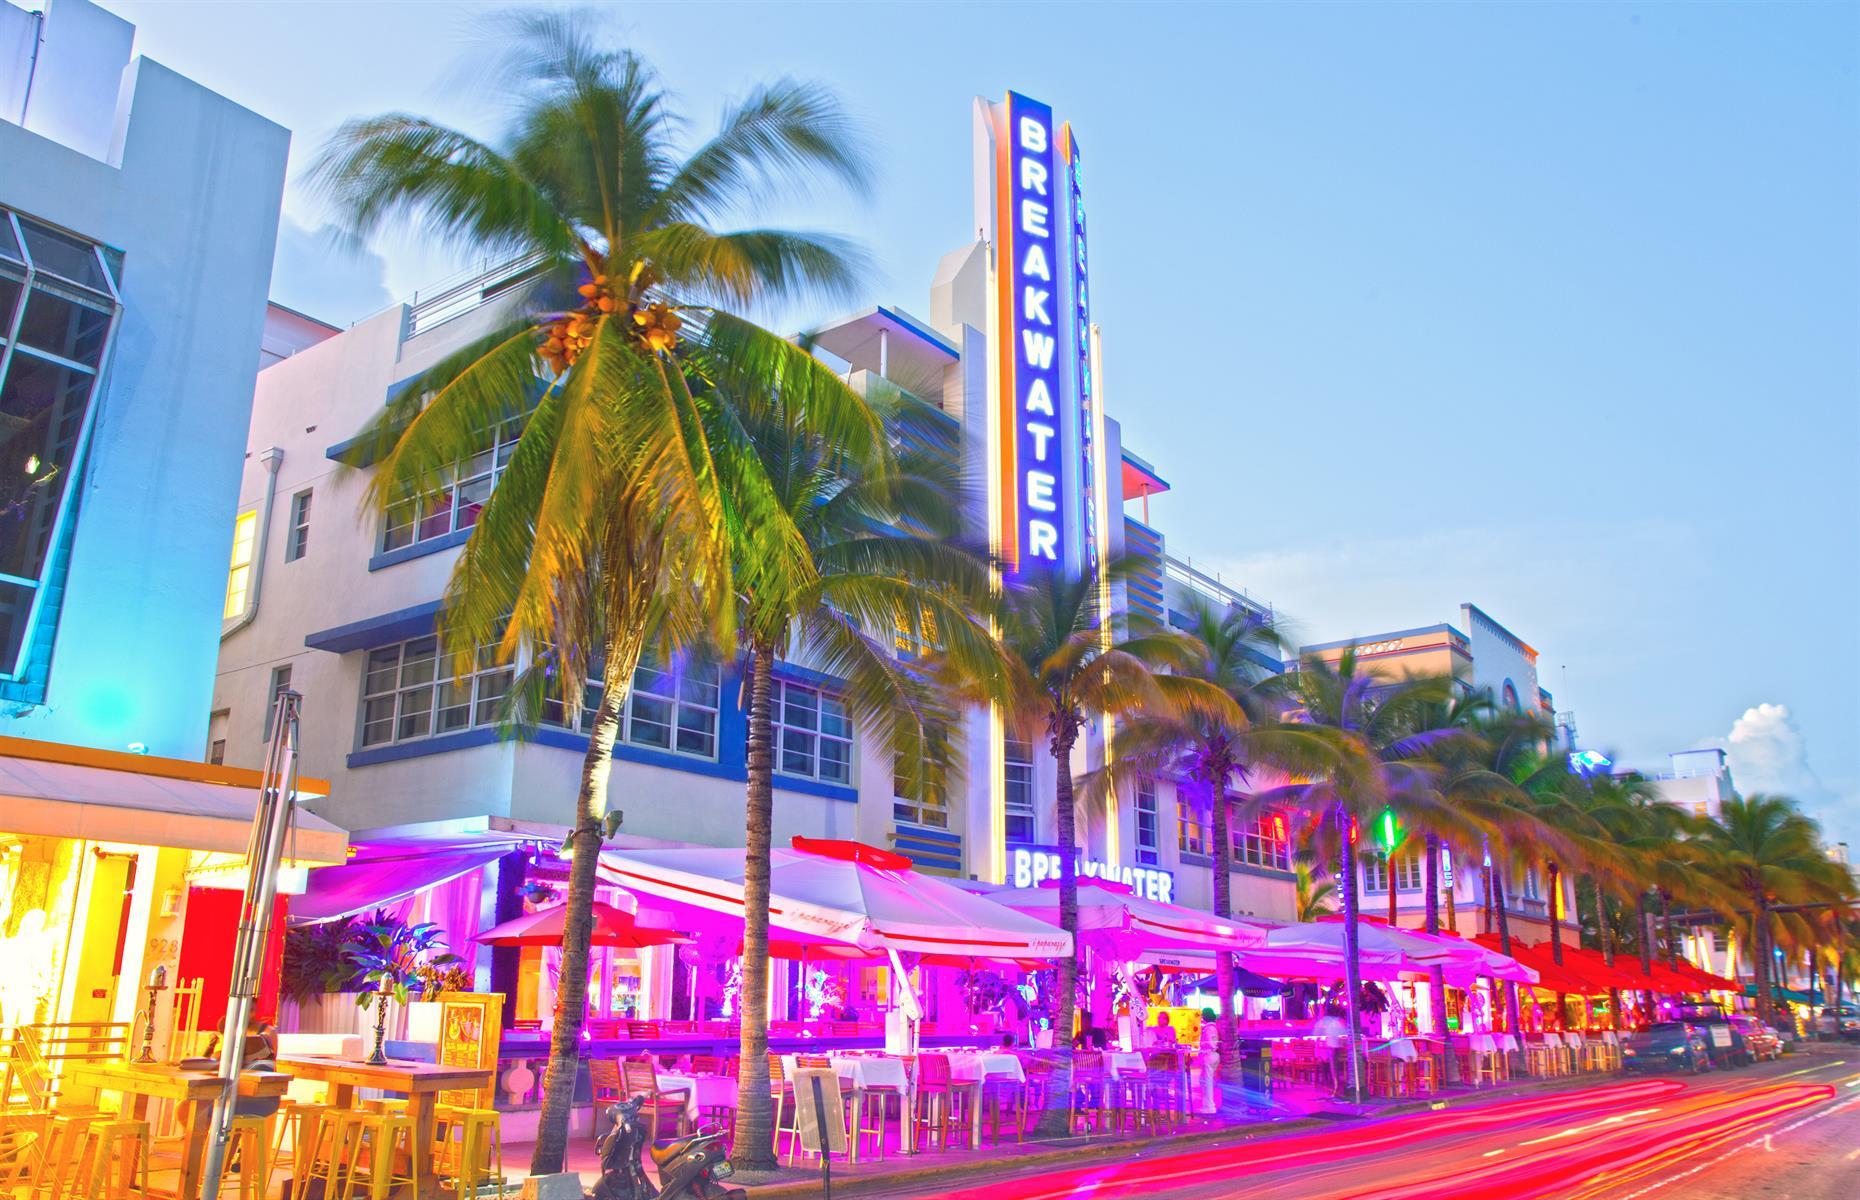 <p>Miami has long been synonymous with glitz and glamour. Relive the Roaring Twenties (and beyond) with an <a href="https://mdpl.org/tours/art-deco-walking-tour/">Official Art Deco Walking Tour</a> of Miami’s most iconic buildings, including hotels and restaurants that have been serving the city’s rich and famous for 100 years. Discover how South Beach has changed over time, how to tell the Mediterranean Revival architectural style from Miami Modern (MiMo), and how the Miami Design Preservation League has been fighting to save historic structures since the 1970s.</p>  <p><a href="https://www.loveexploring.com/galleries/185616/americas-most-beautiful-art-deco-hotels?page=1"><strong>These are America's most beautiful Art Deco hotels</strong></a></p>